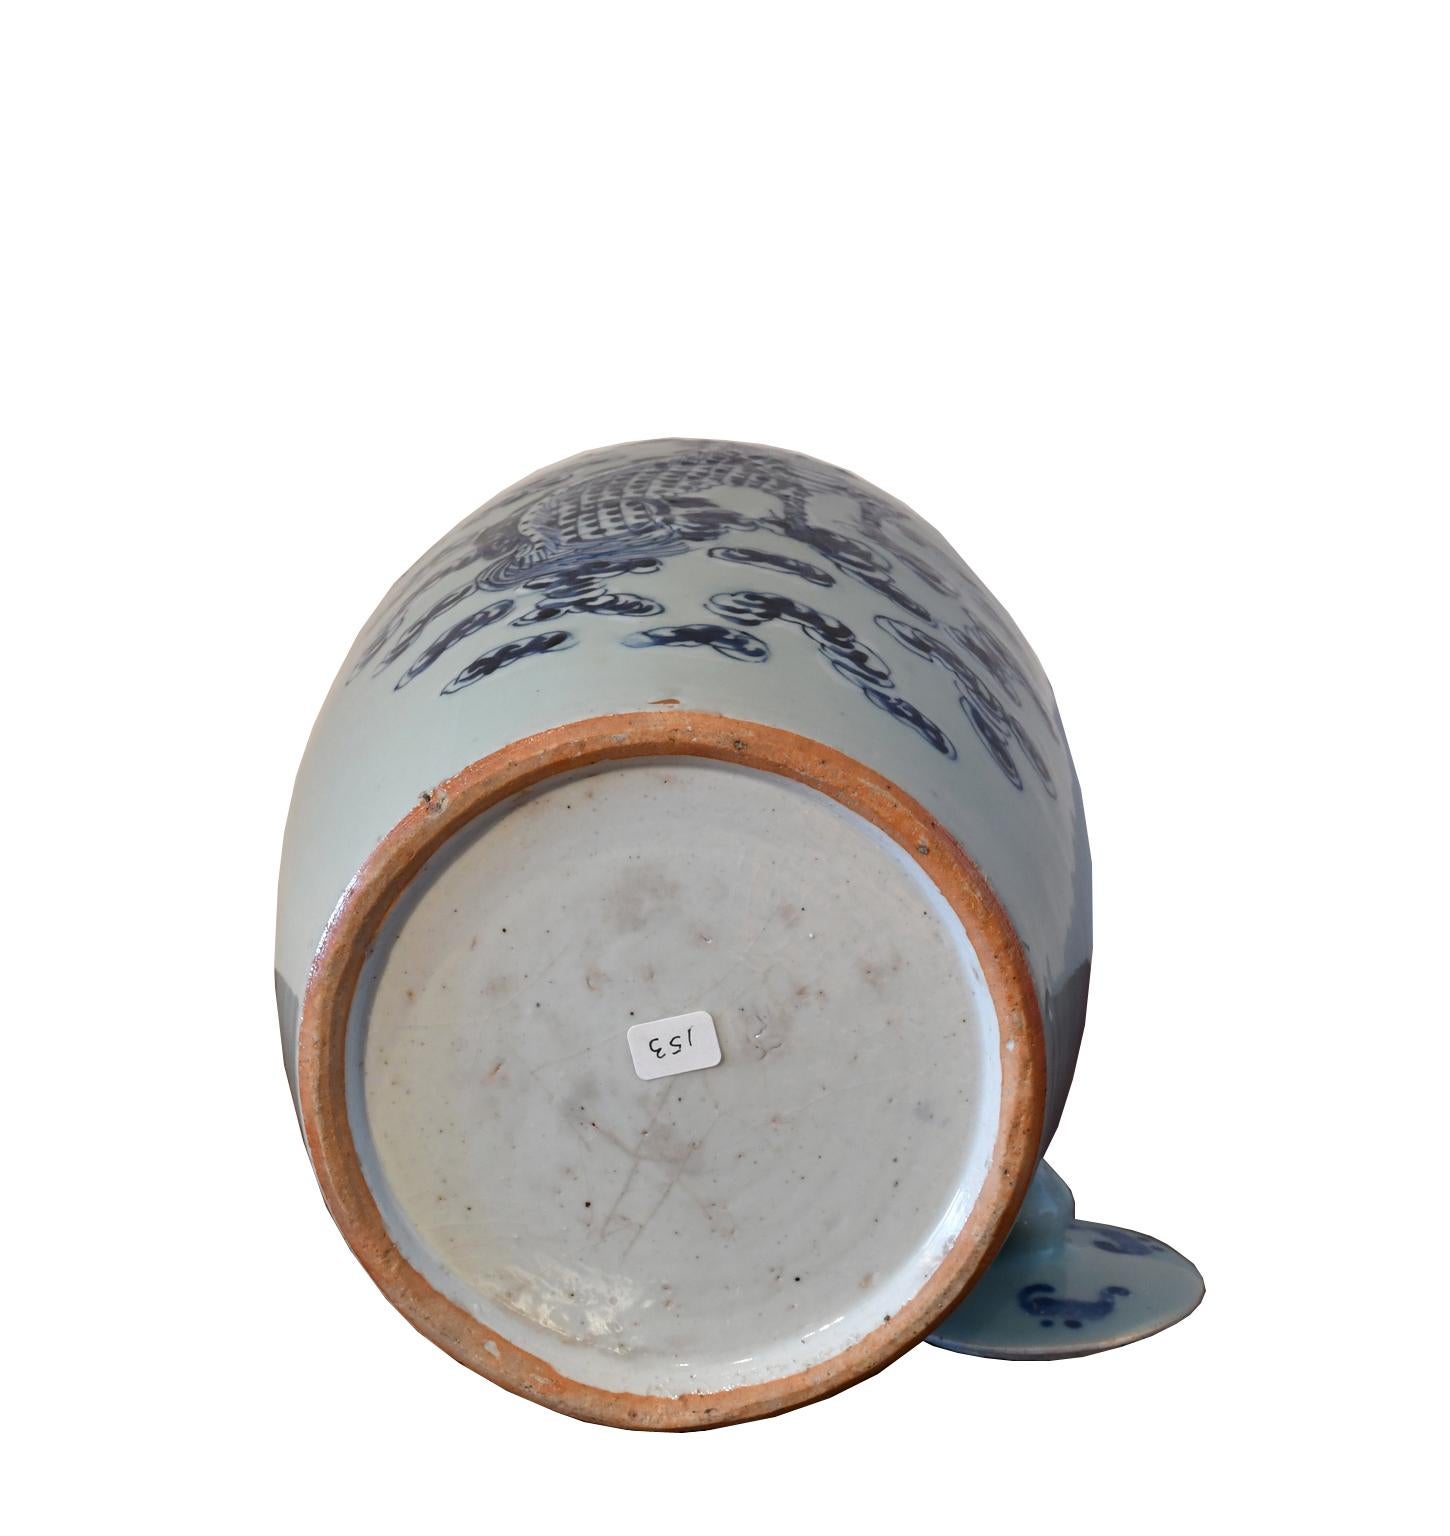 Qing Chinese Blue & White Porcelain Lidded Jar w Hand Painted Five-Clawed Dragon im Zustand „Gut“ im Angebot in Miami, FL